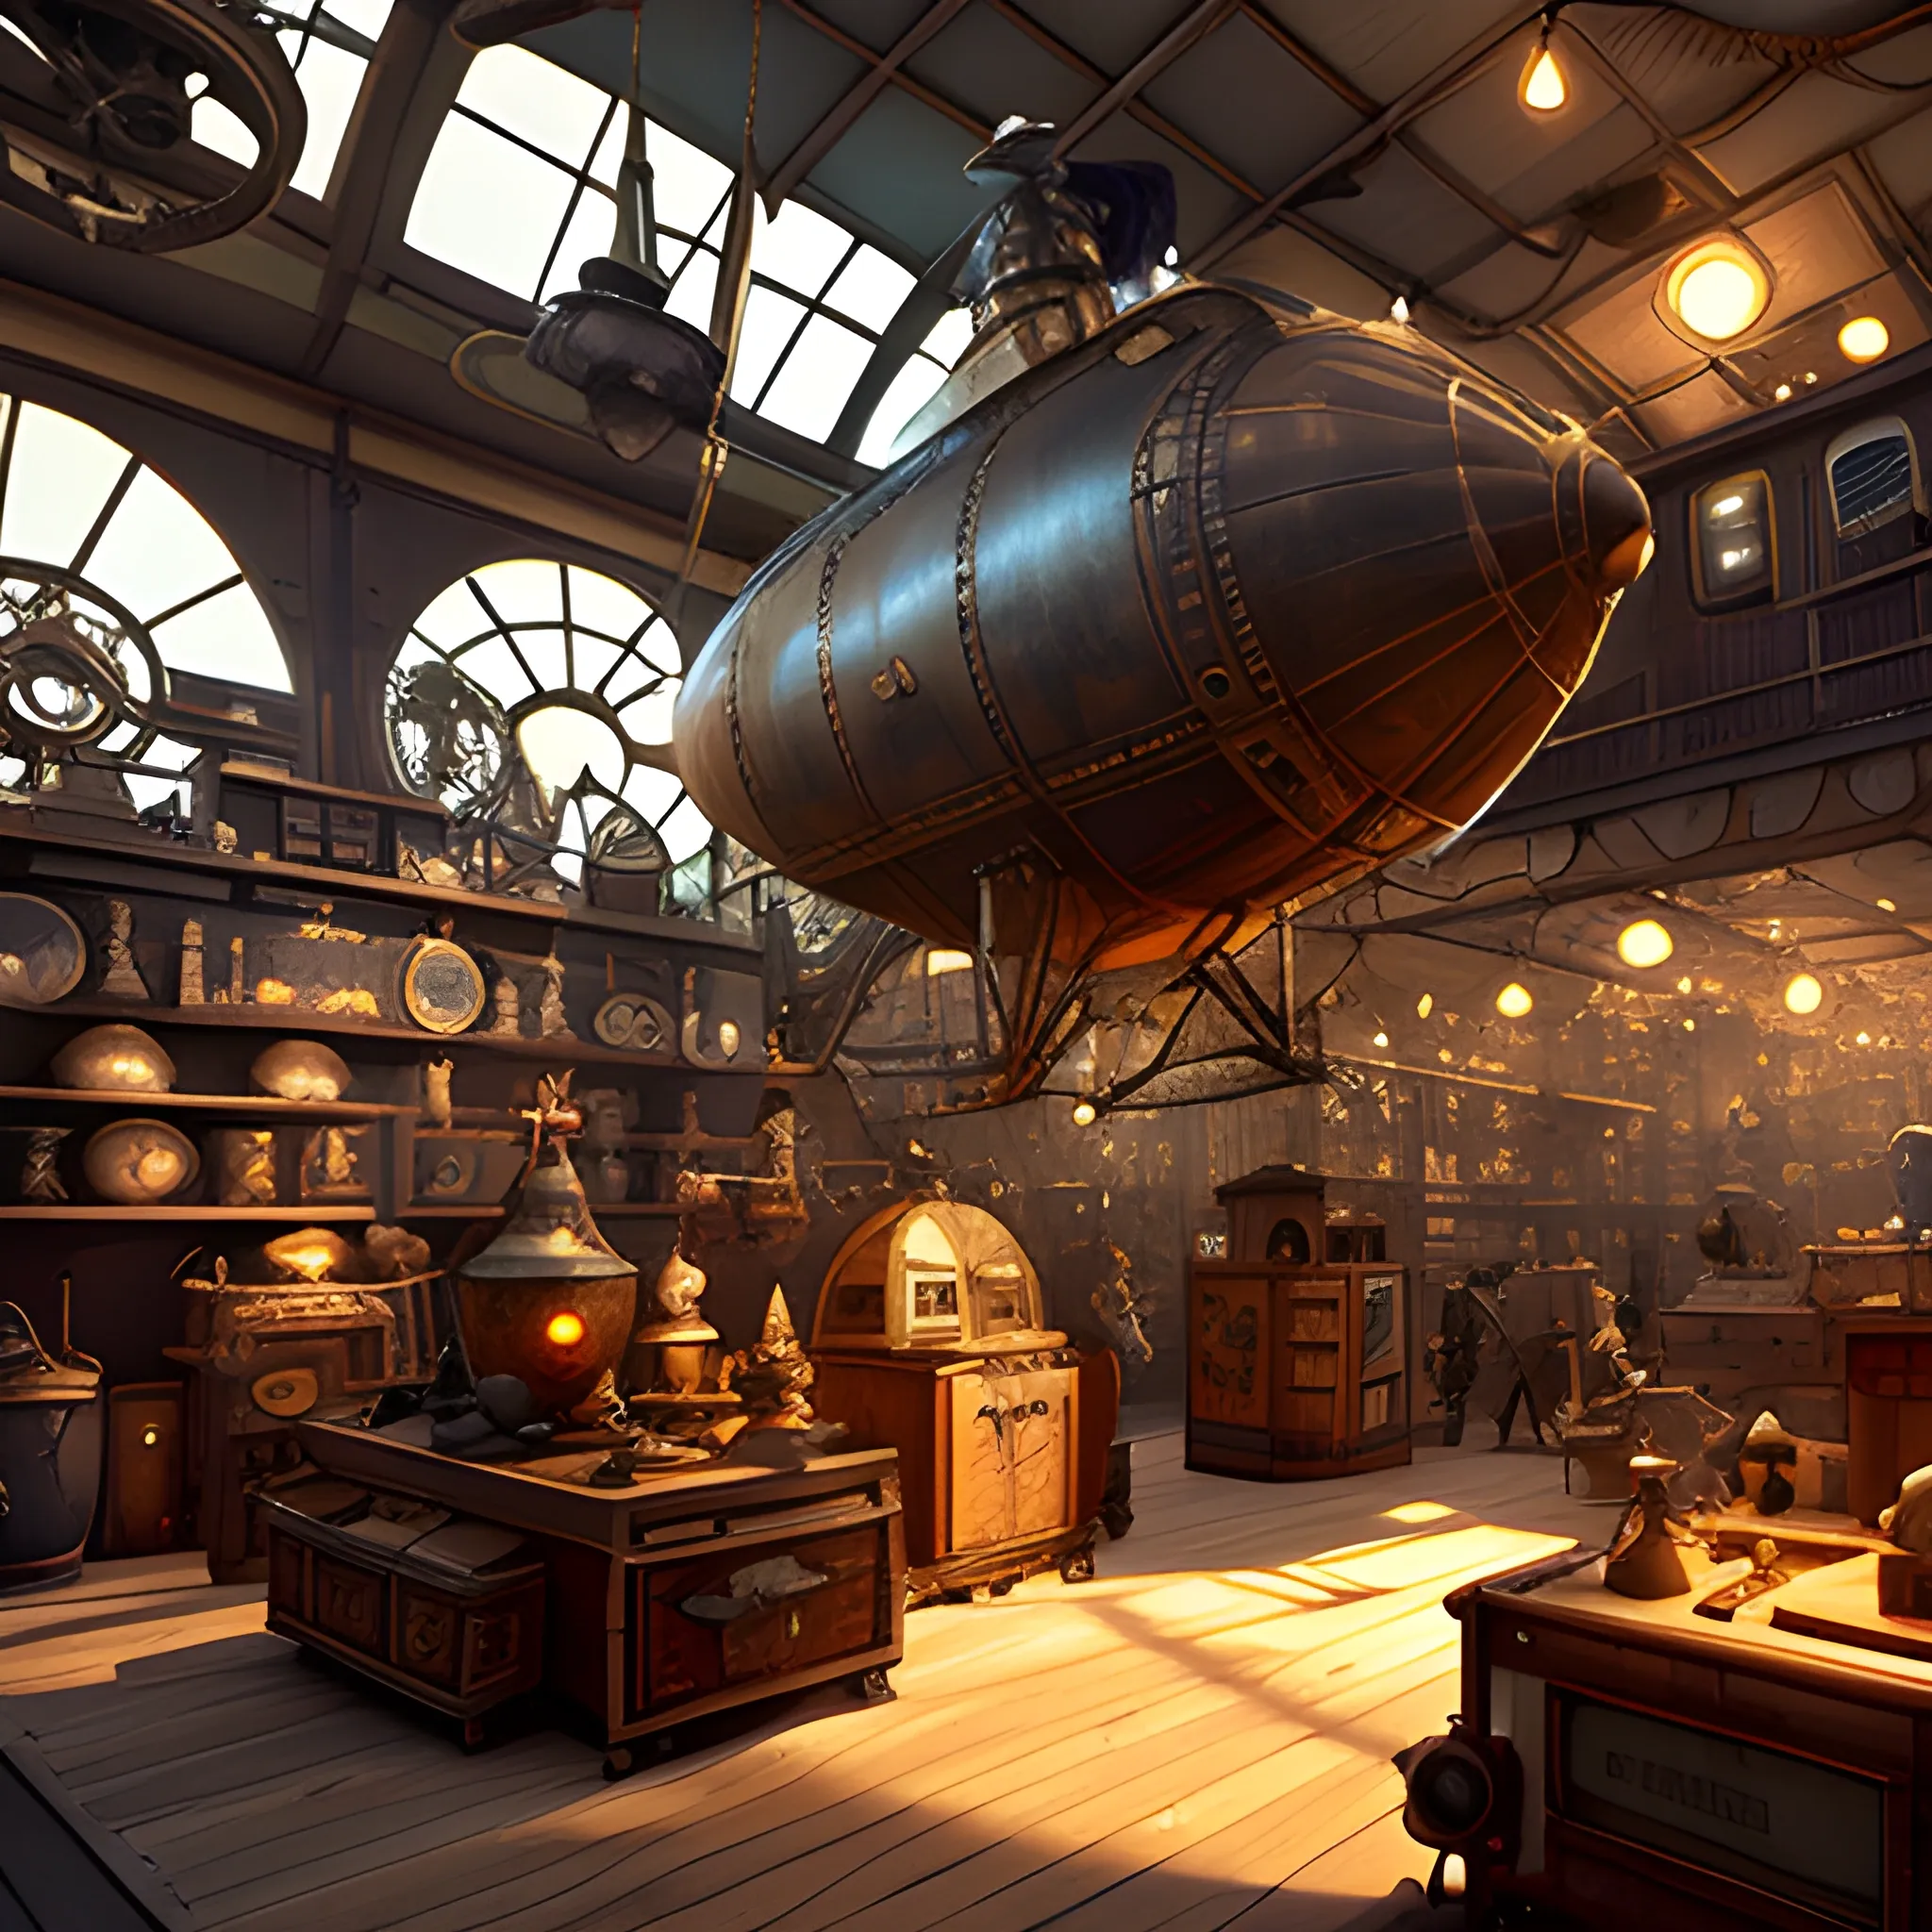 Oversized stuffed toys filled a steampunk antique store in an airship, film quality, unreal engine, matte, award-winning, beautiful studio Darklight